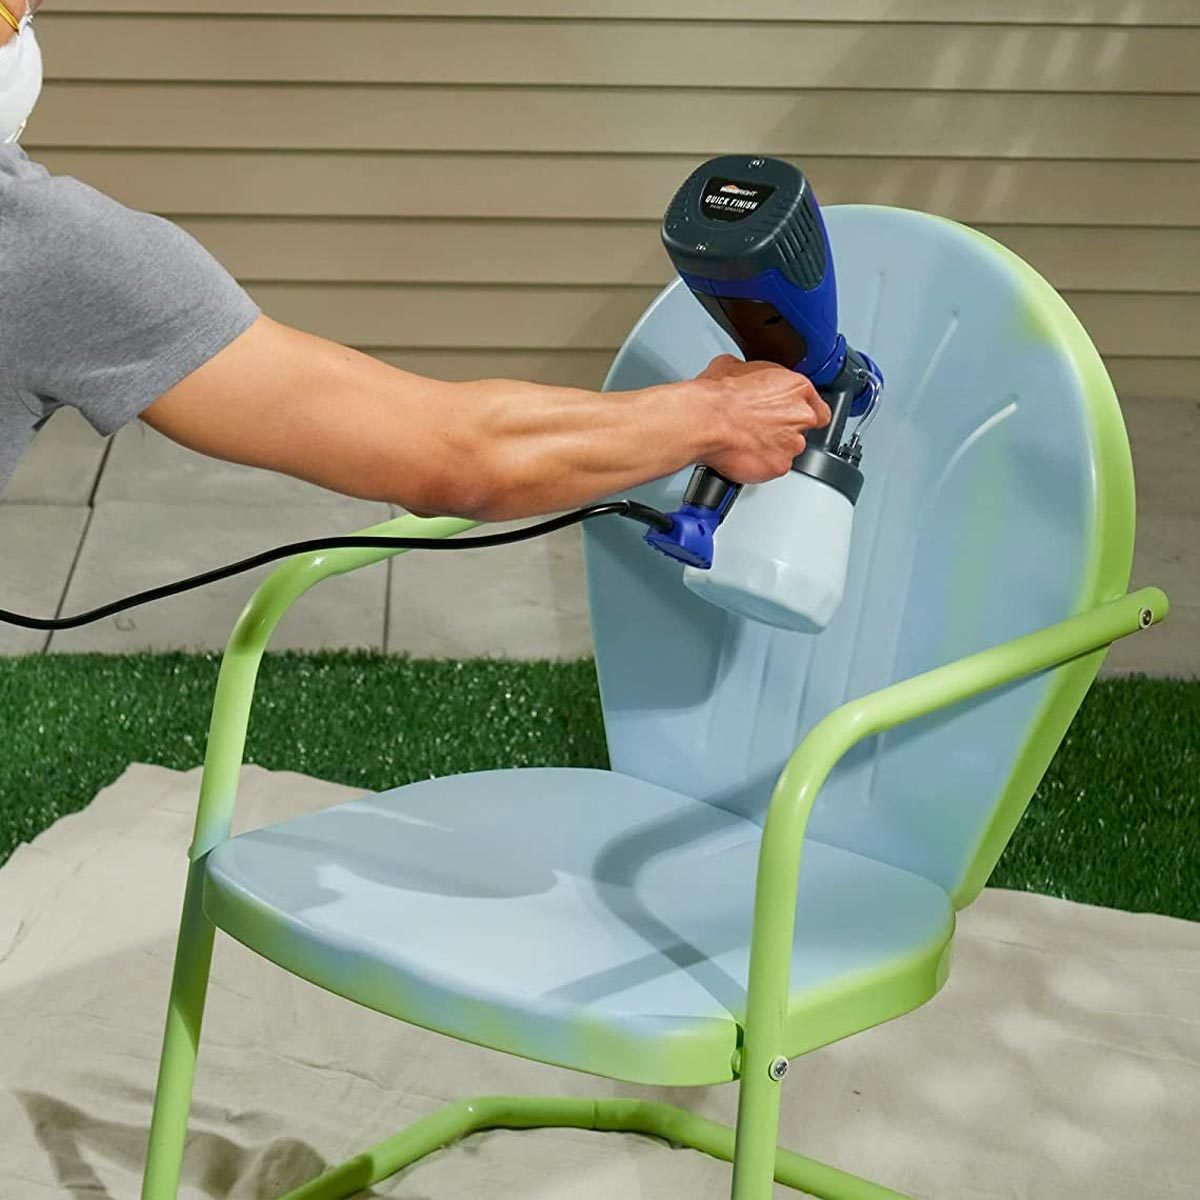 Paint Spray Gun For Beginners: Smooth Furniture Makeover